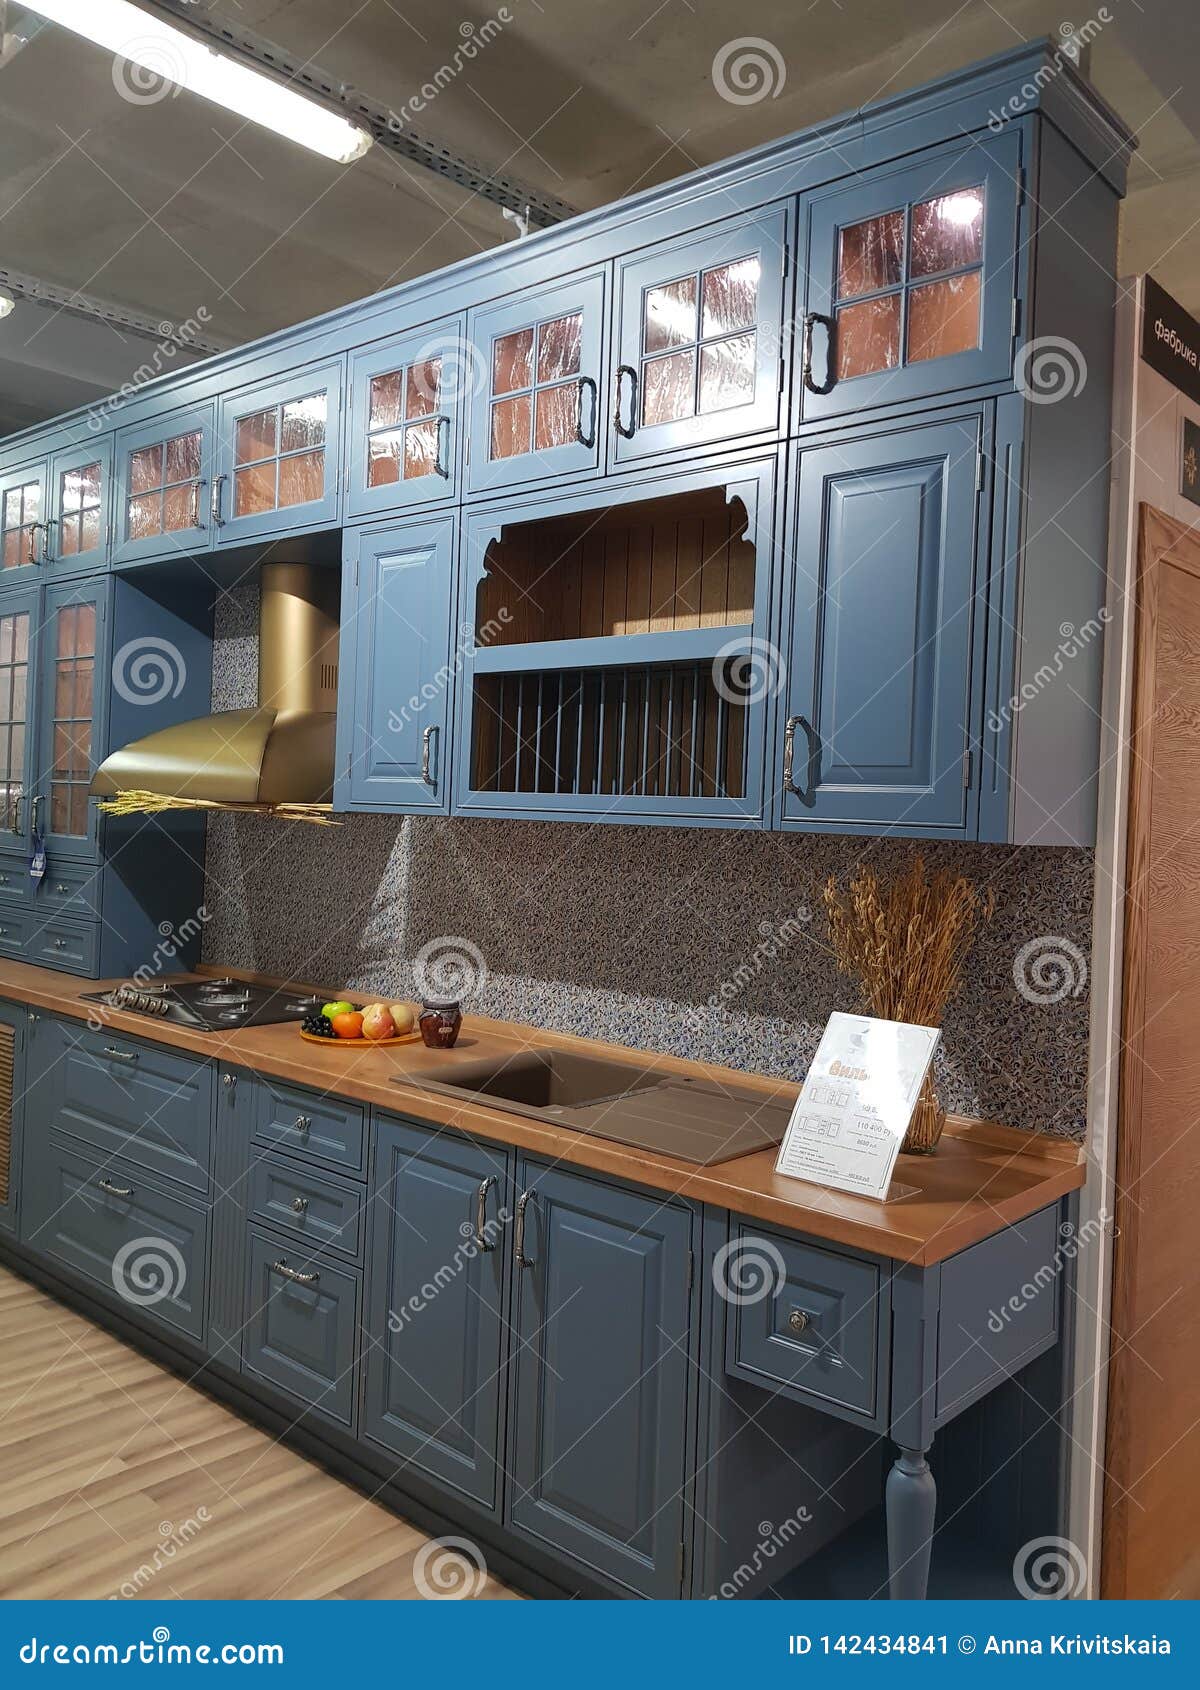 Modern Kitchens On Sale In A Furniture Store Editorial Photo